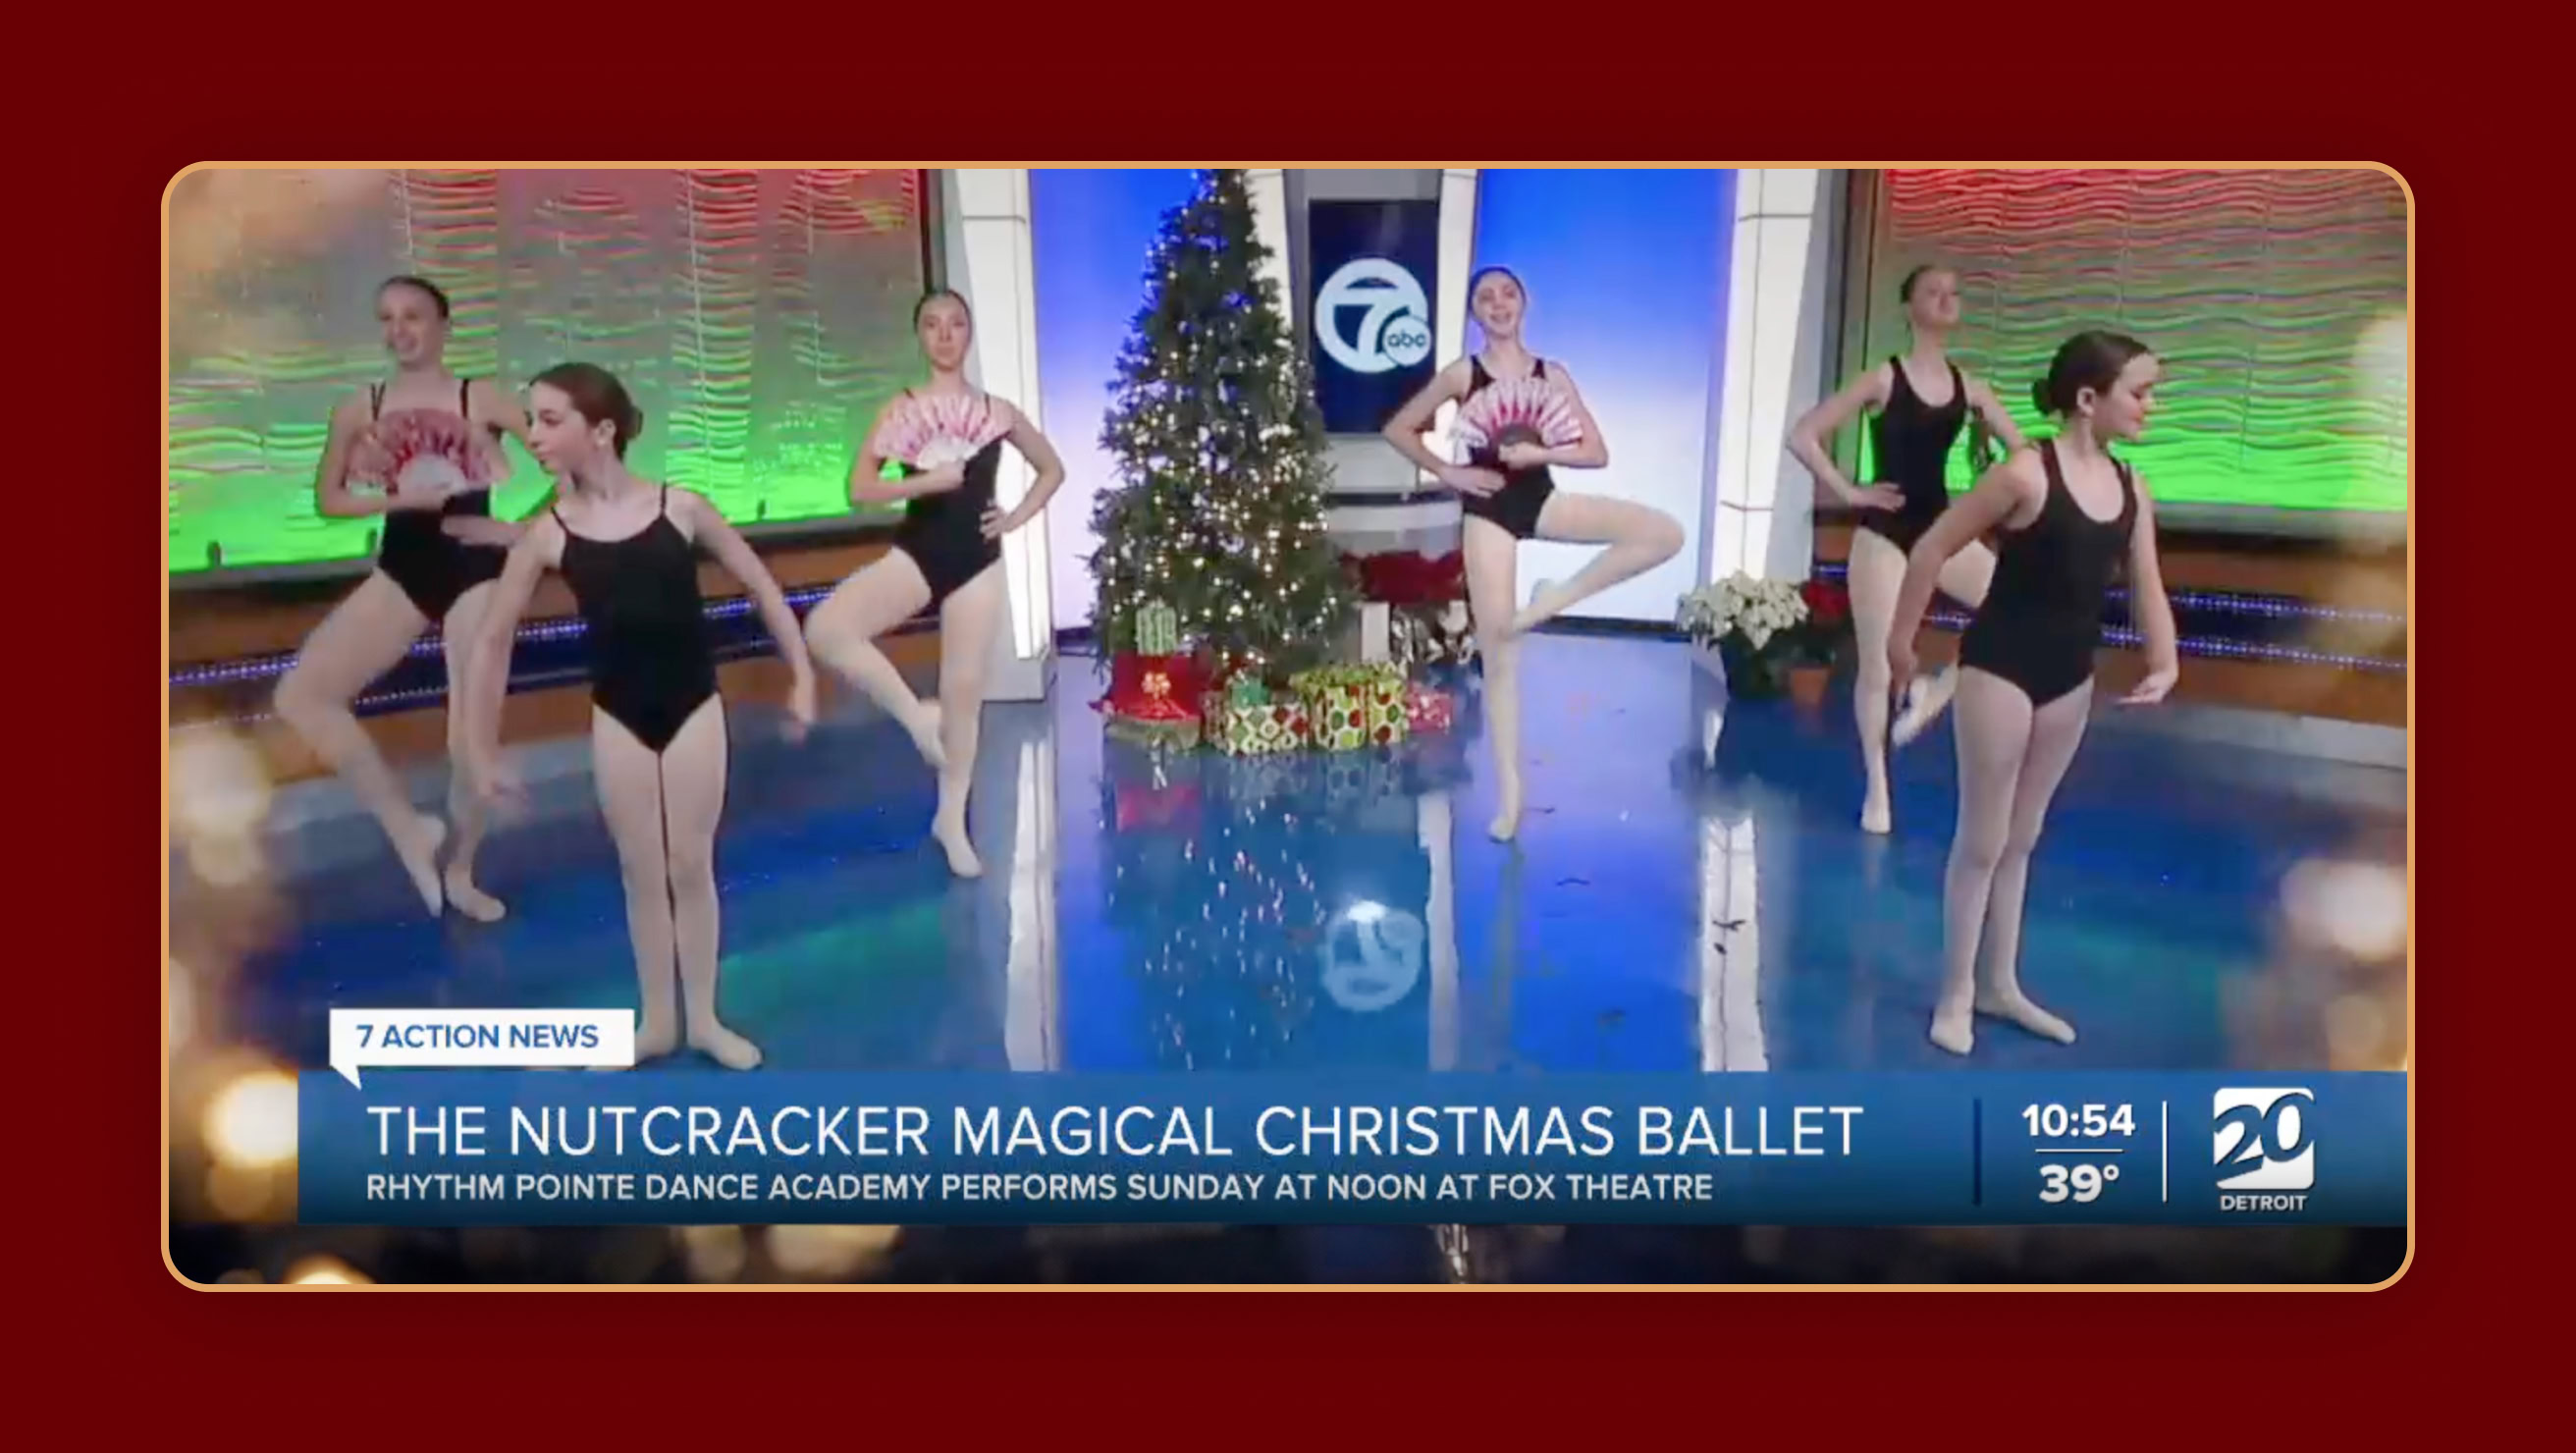 Dance performance on a television news program for Channel 20 Detroit, featuring ballet dancers in black outfits posing beside a Christmas tree, with news graphics displayed.